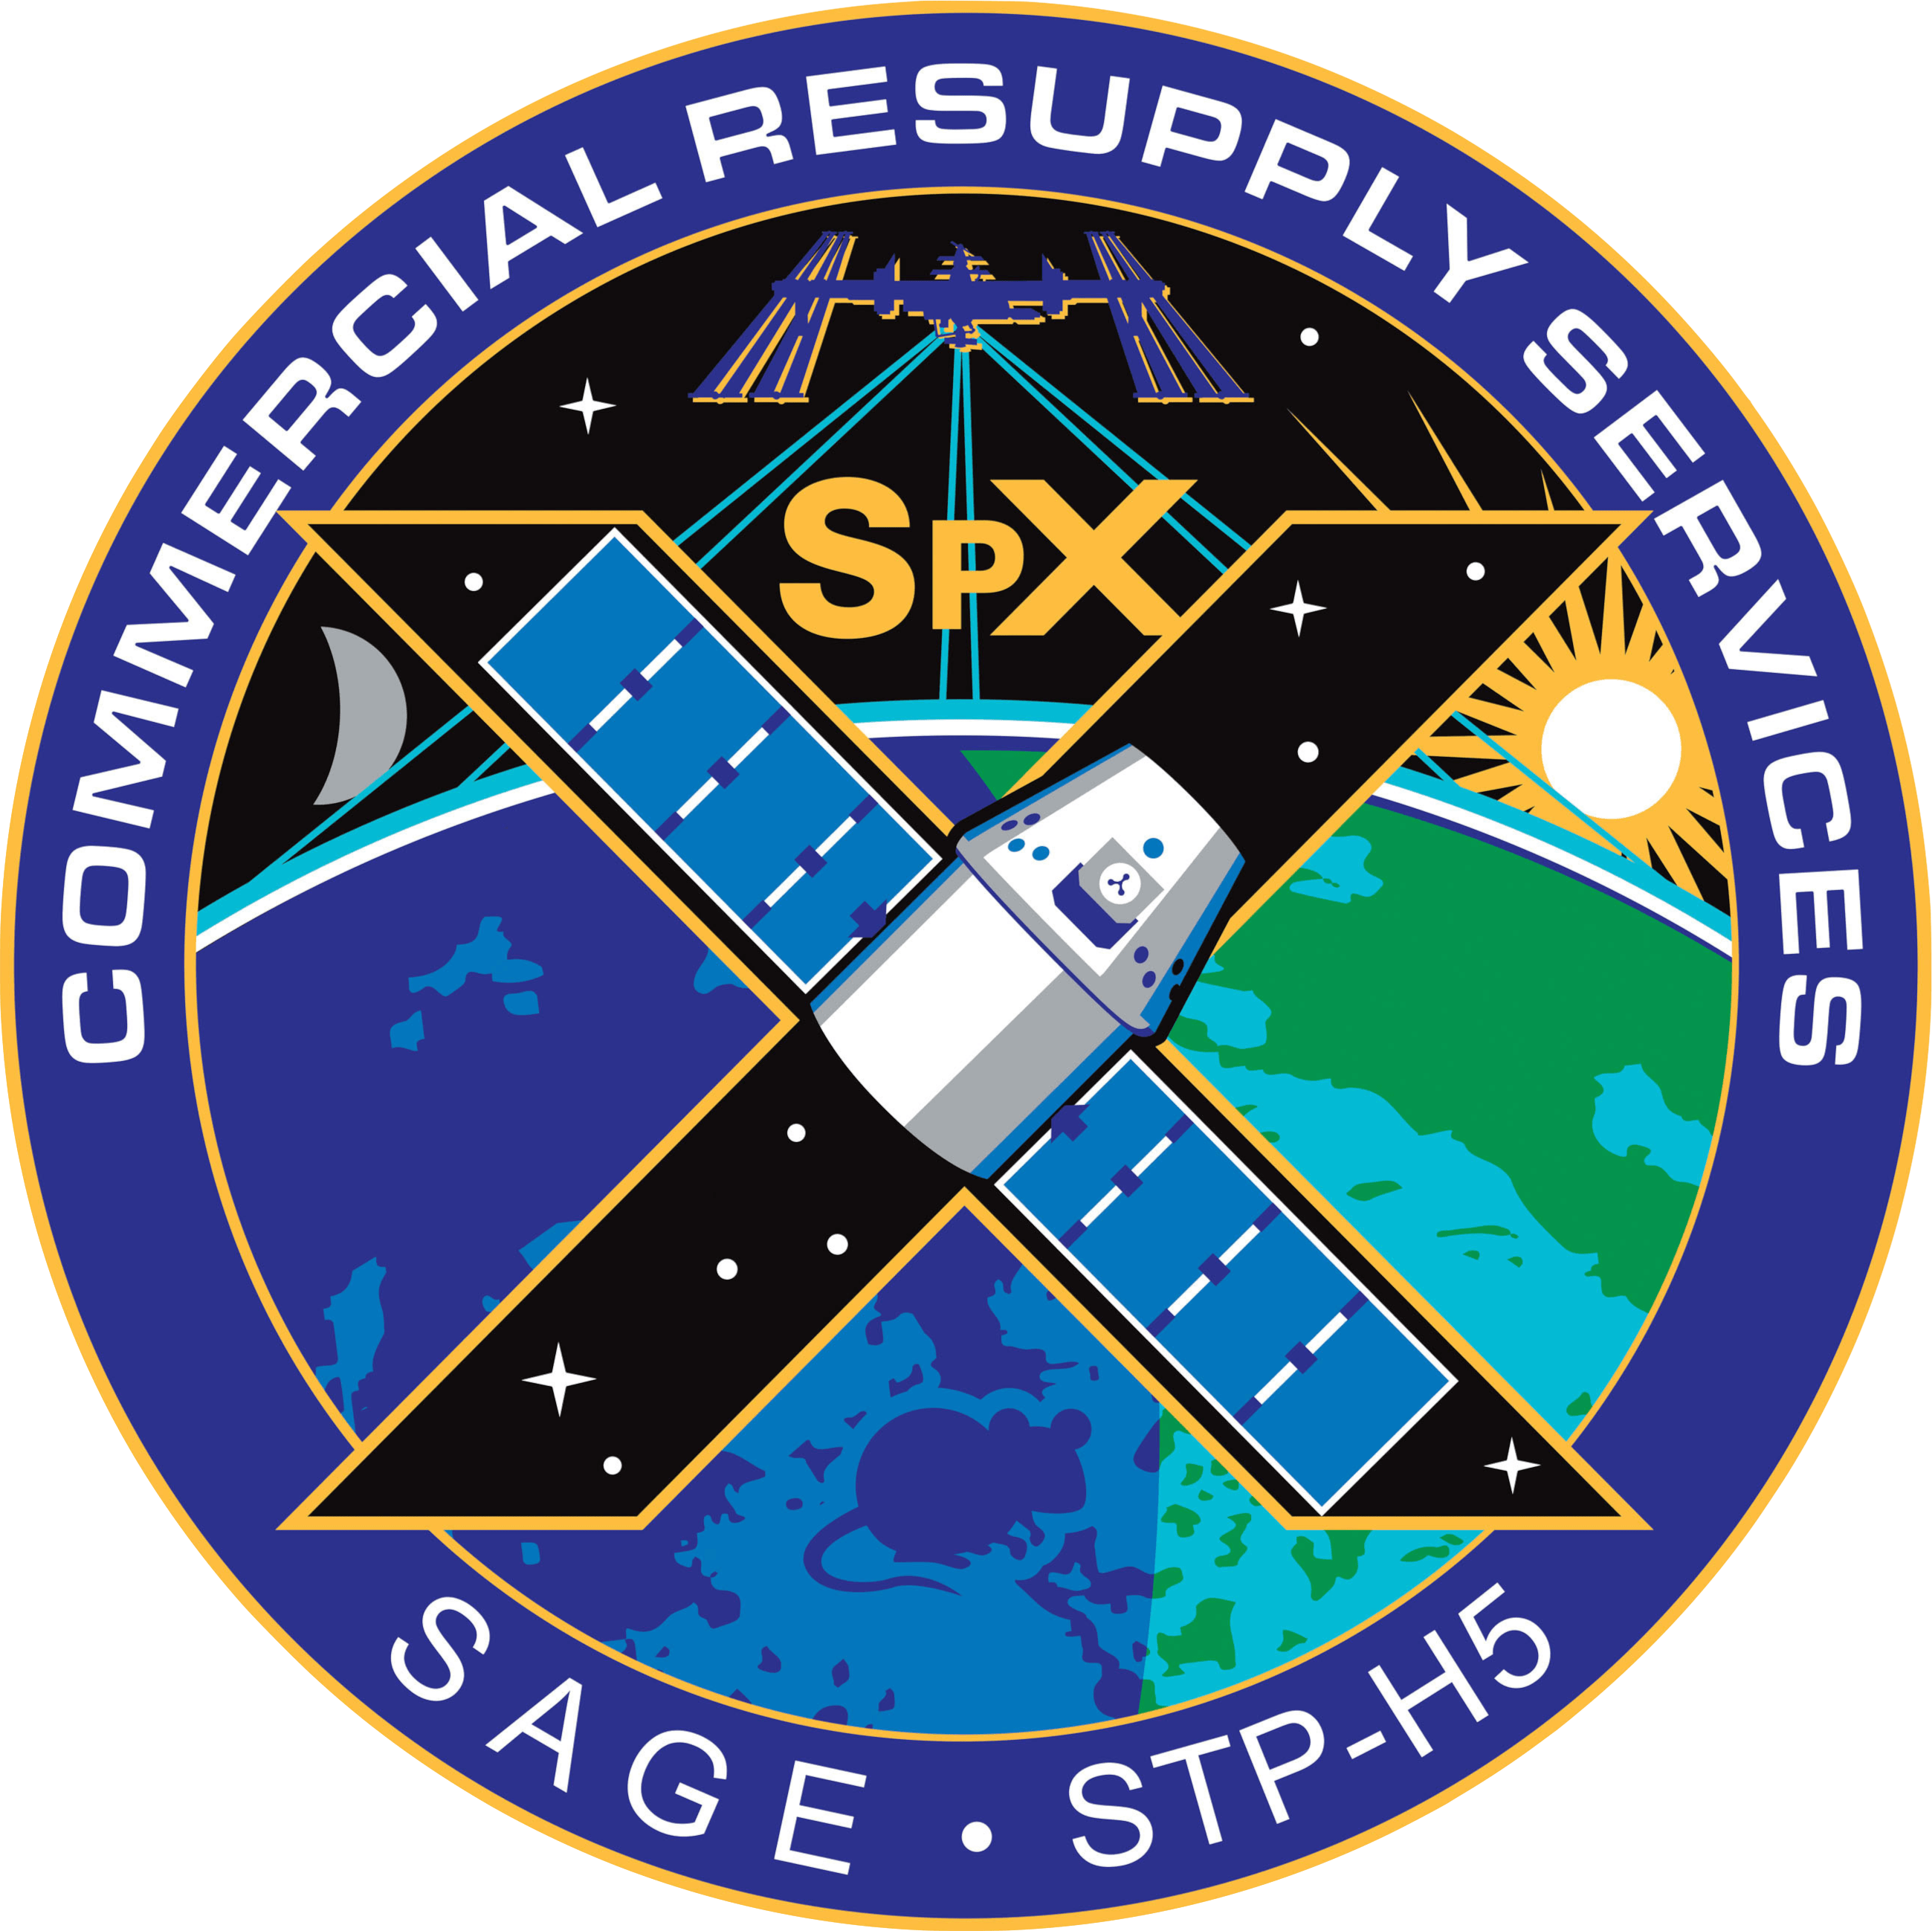 10 Mission SpaceX Logo - NASA Patch For The CRS SpX 10 Mission (NOT The SpaceX Patch!)